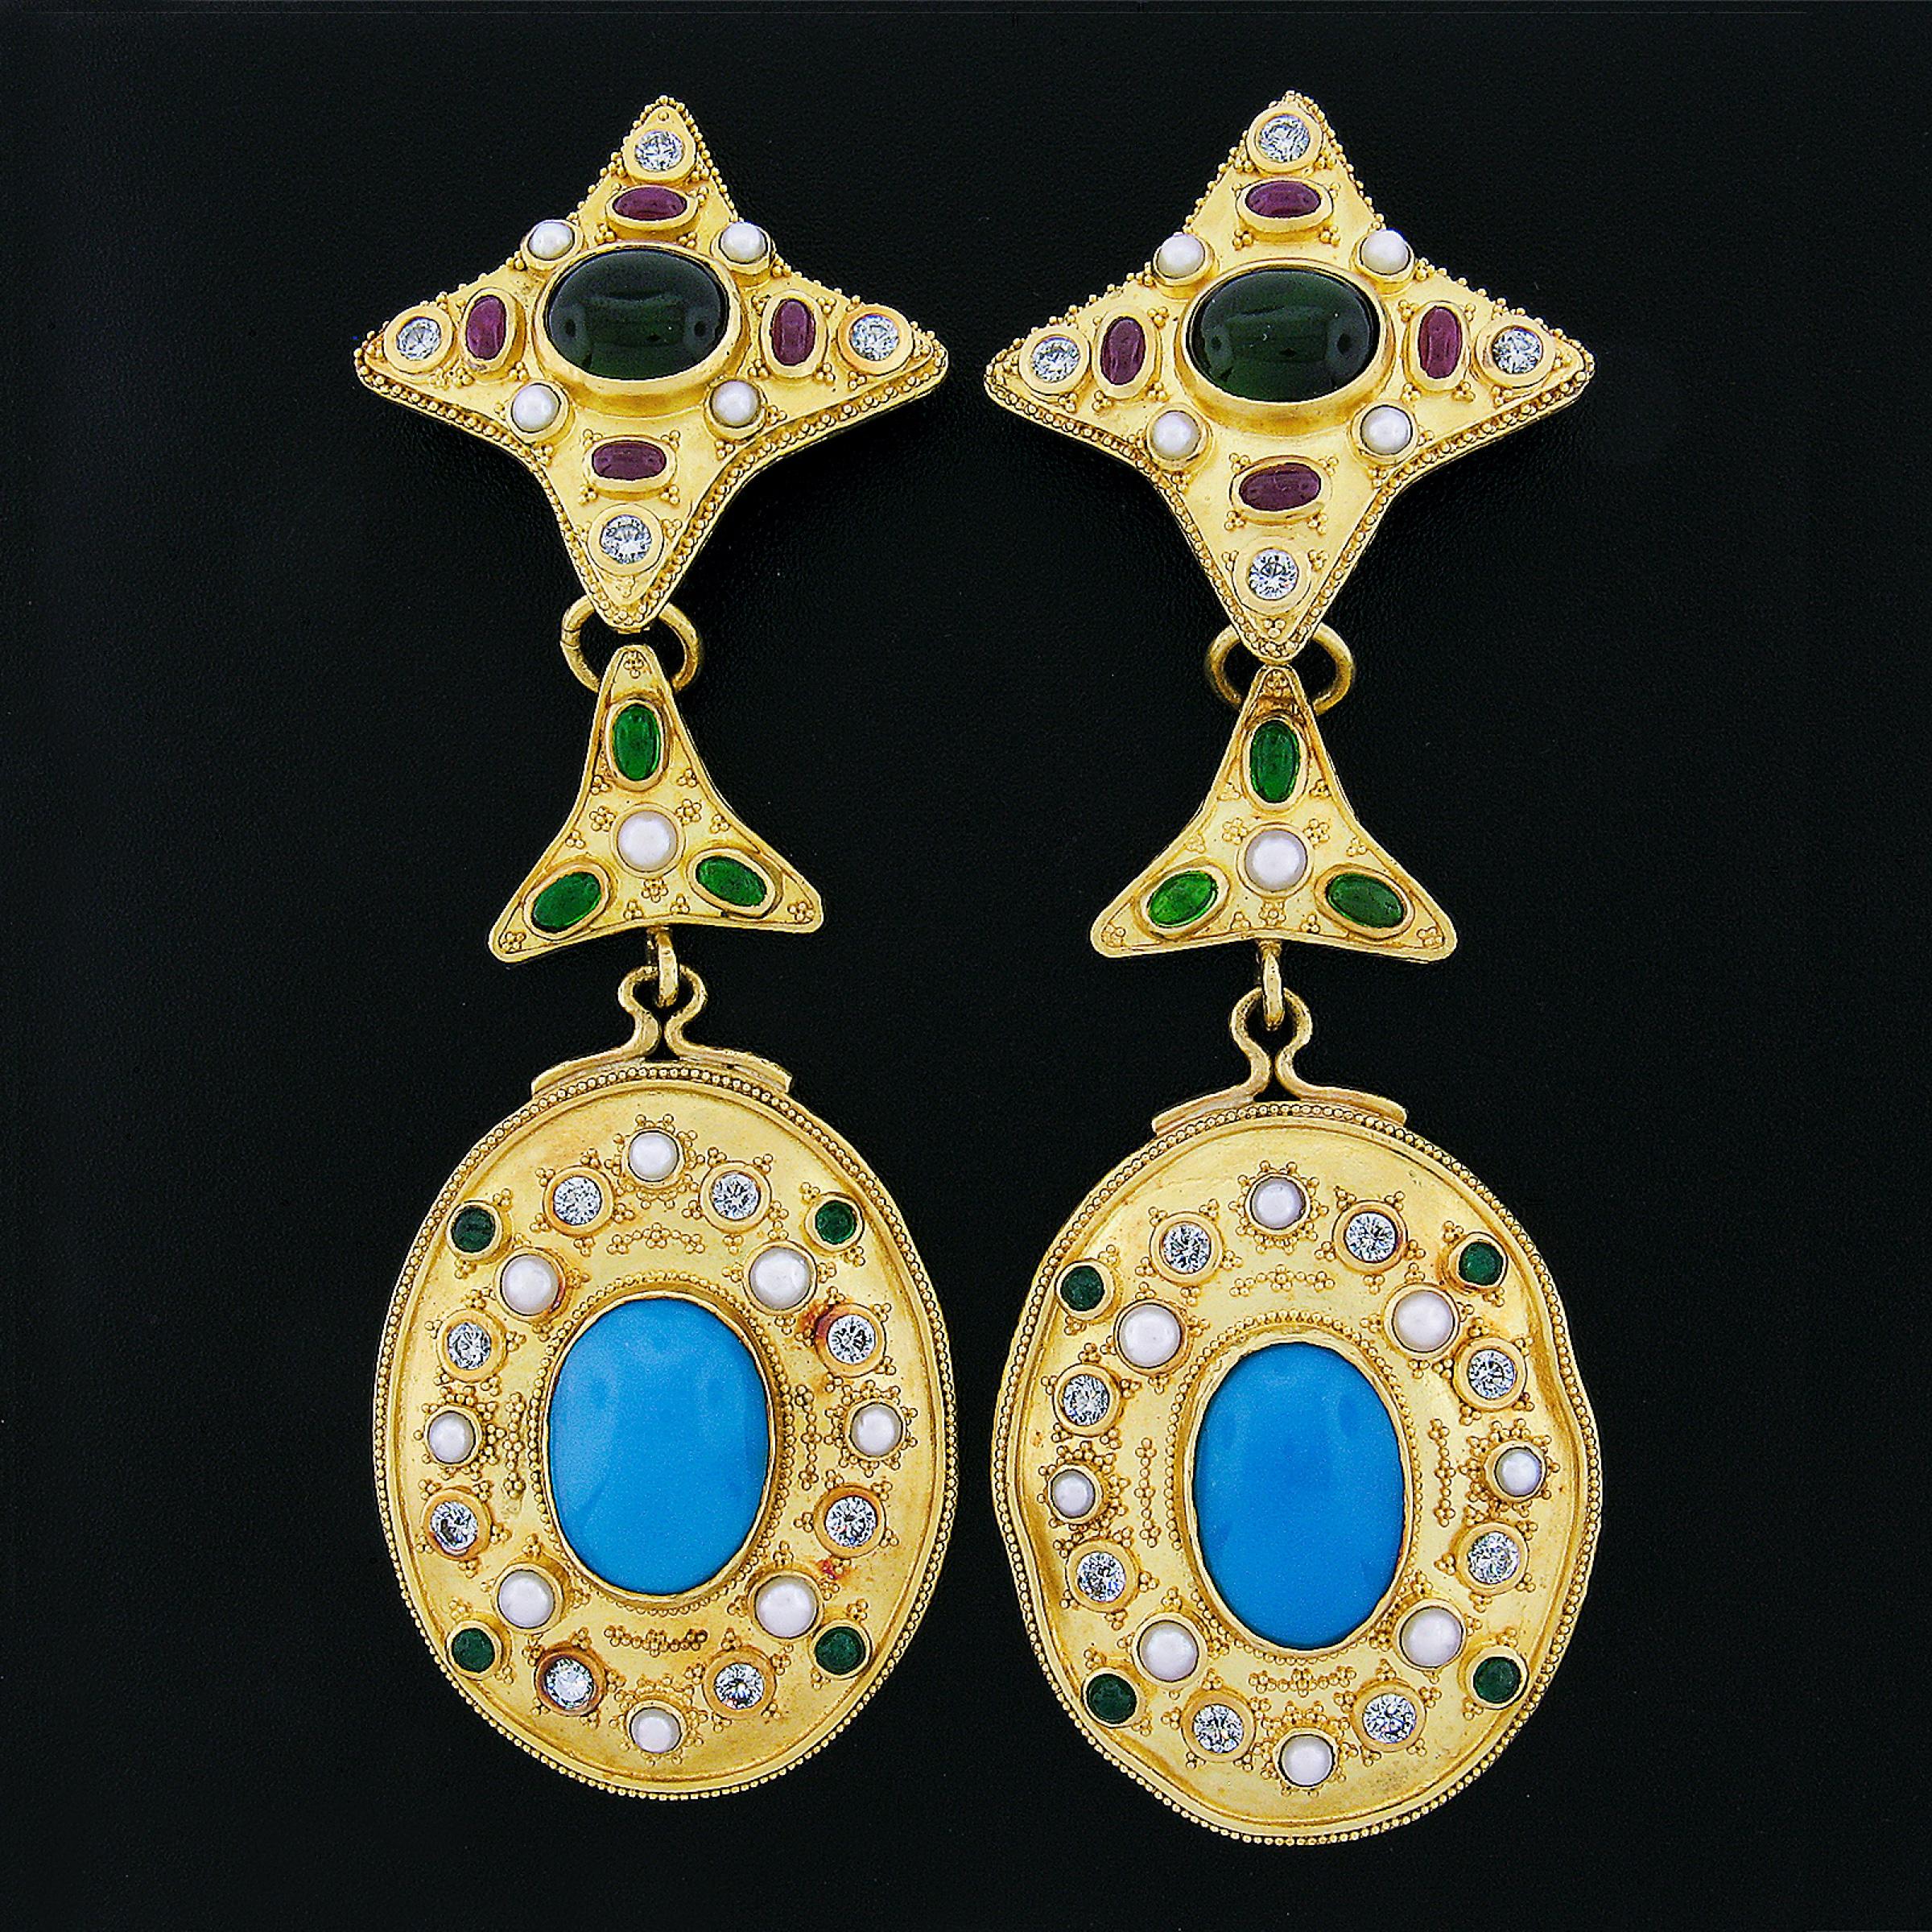 These magnificent and substantial pair of earrings are crafted in solid 22k yellow gold and feature a large and long design hand set with fine quality diamonds, tourmalines, rubies, turquoise and cultured pearls. The earrings are also encrusted with